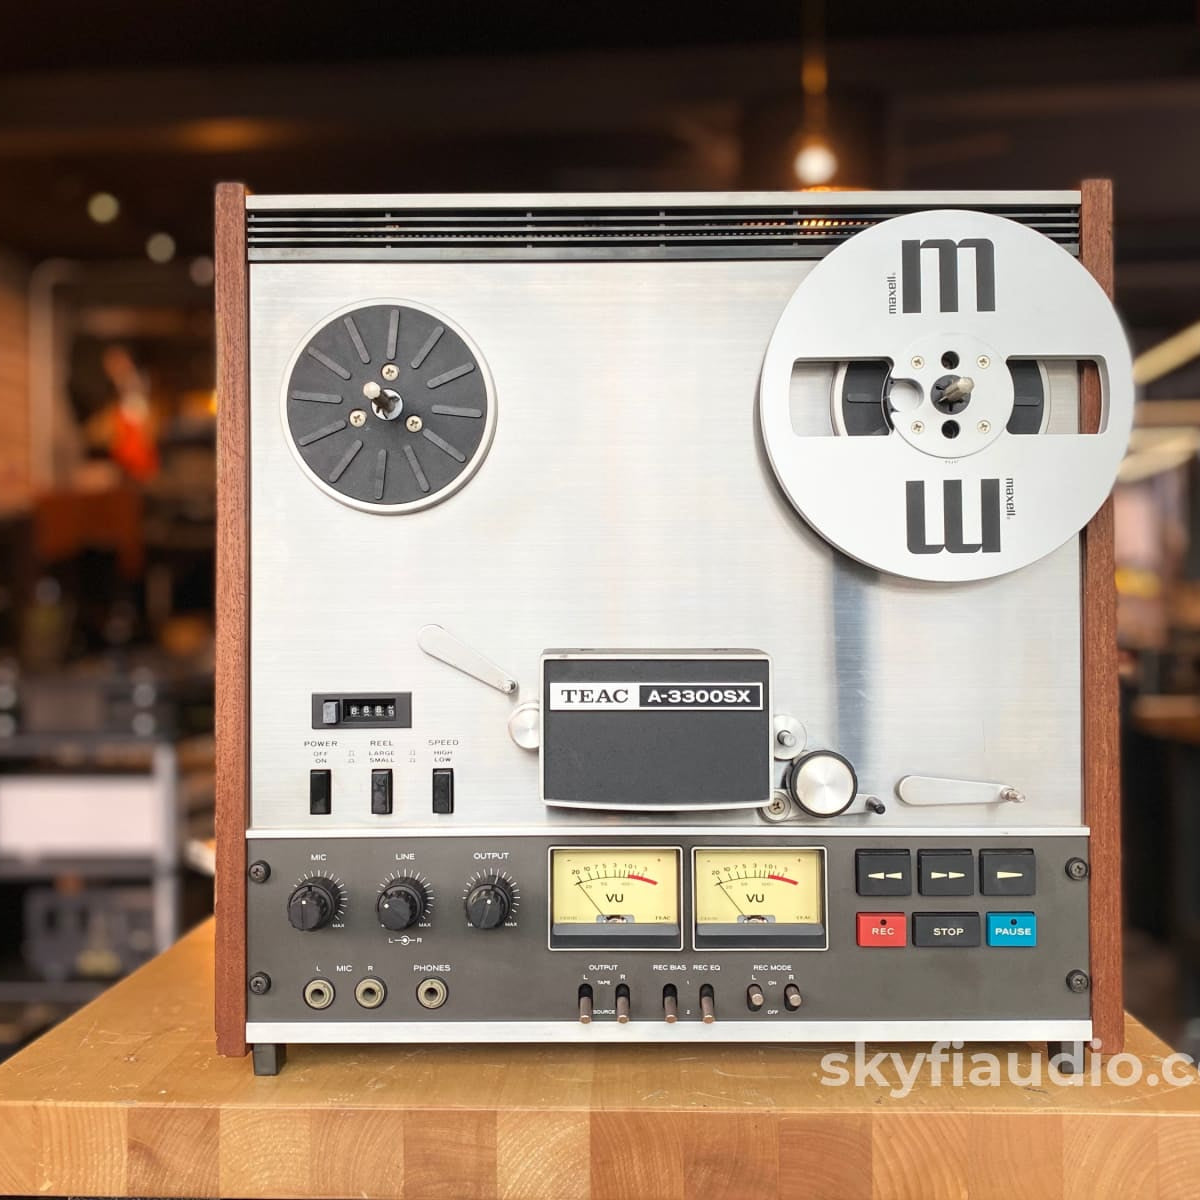 TEAC A-3300SX Reel to Reel Tape Deck